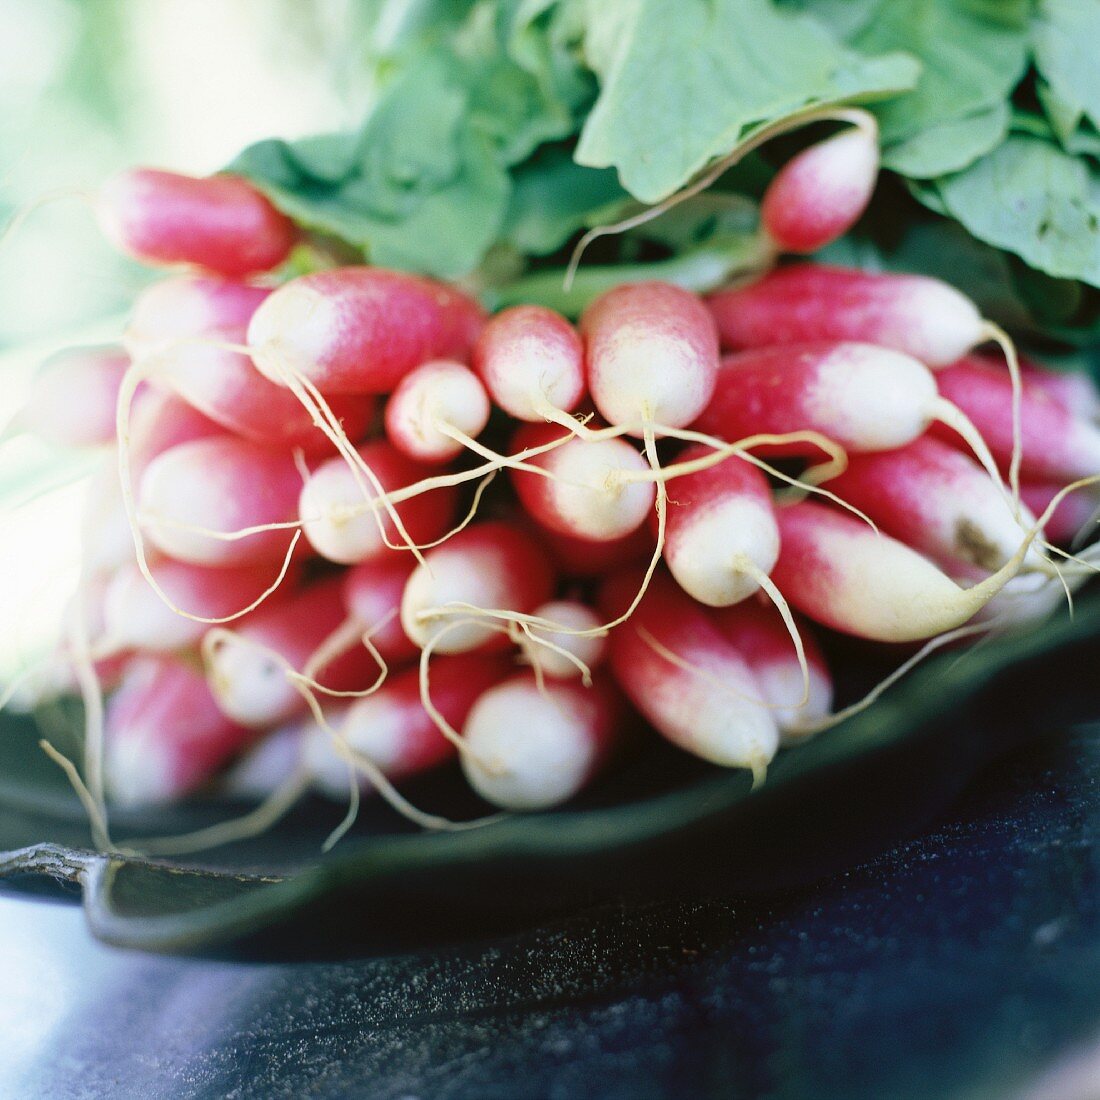 bunch of radishes